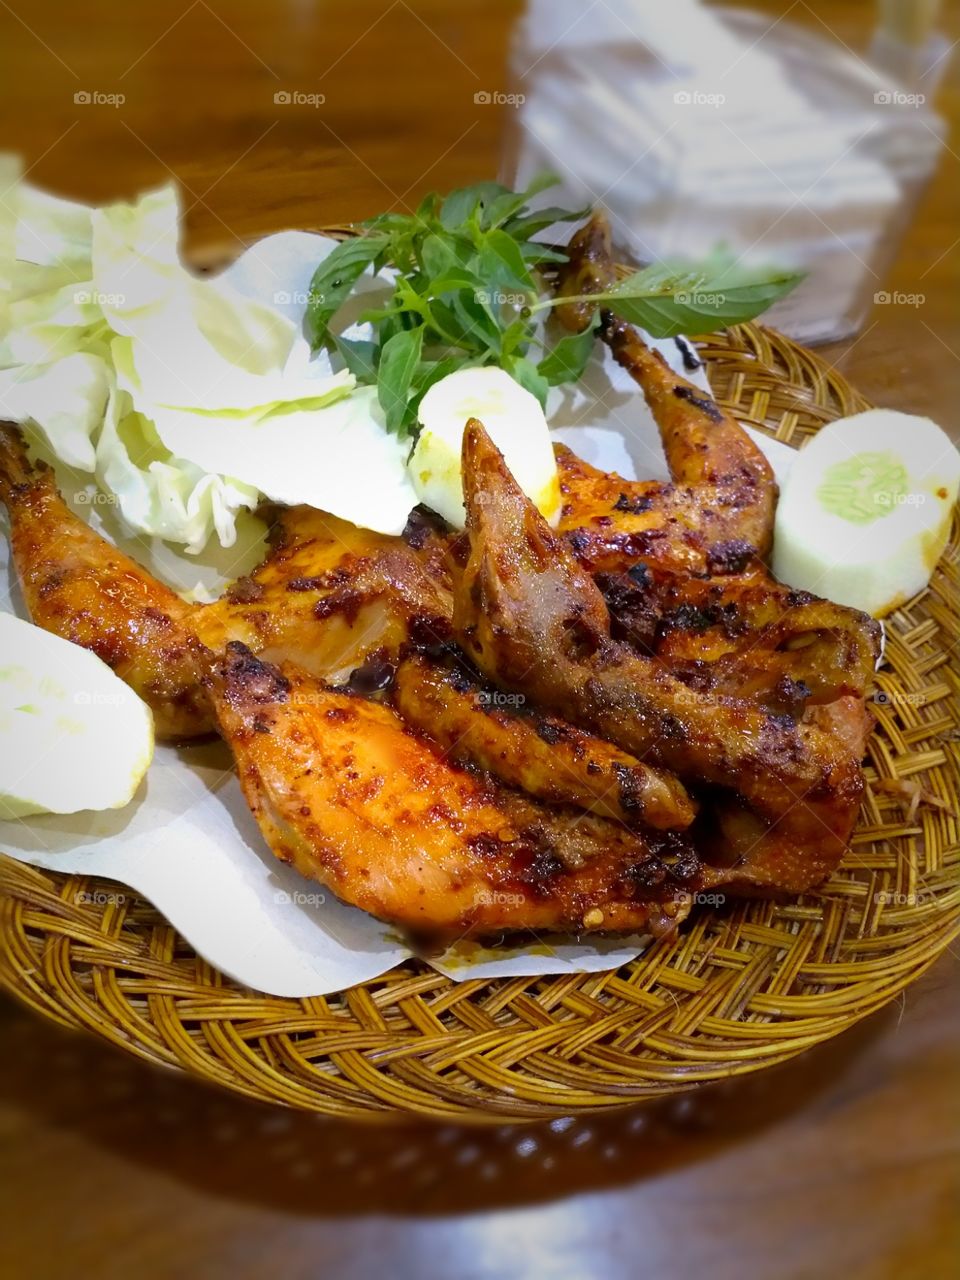 Indonesian food - Grilled Chicken